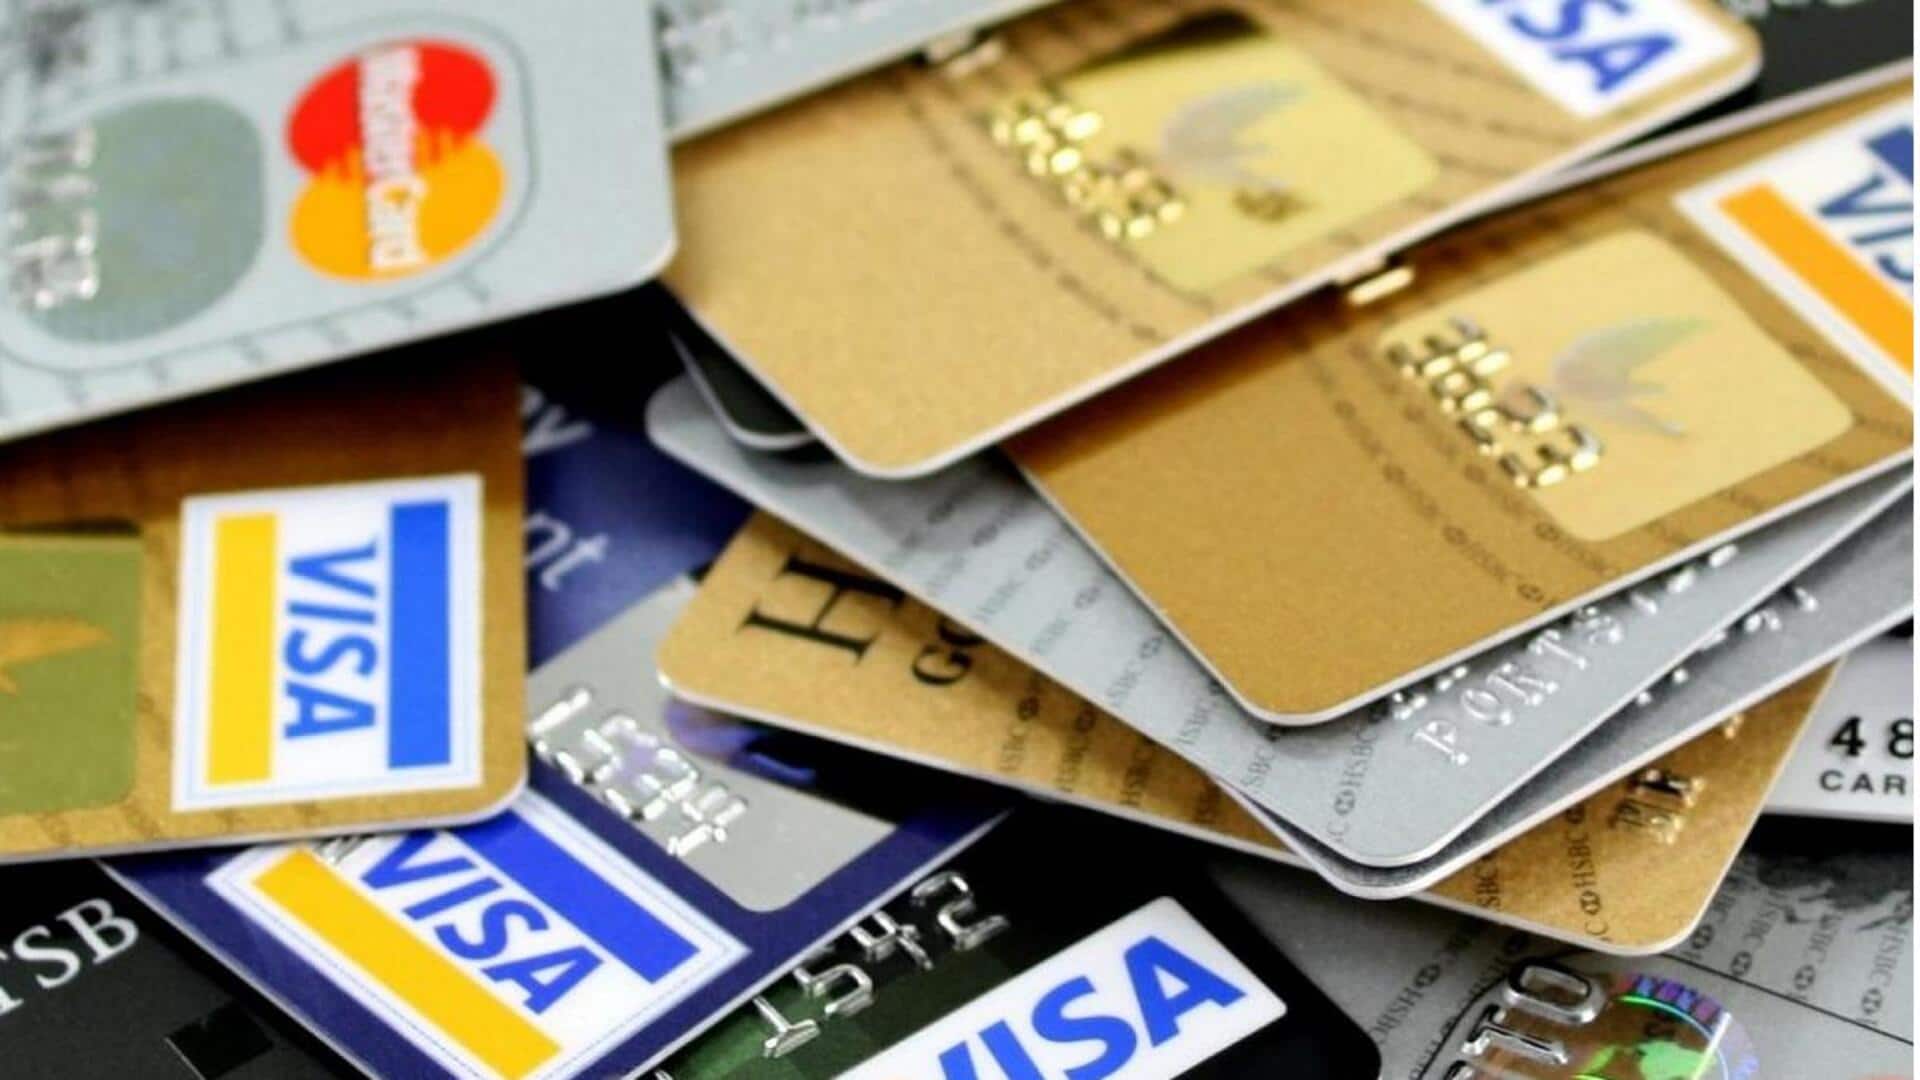 Indian banks have issued over 100 million credit cards